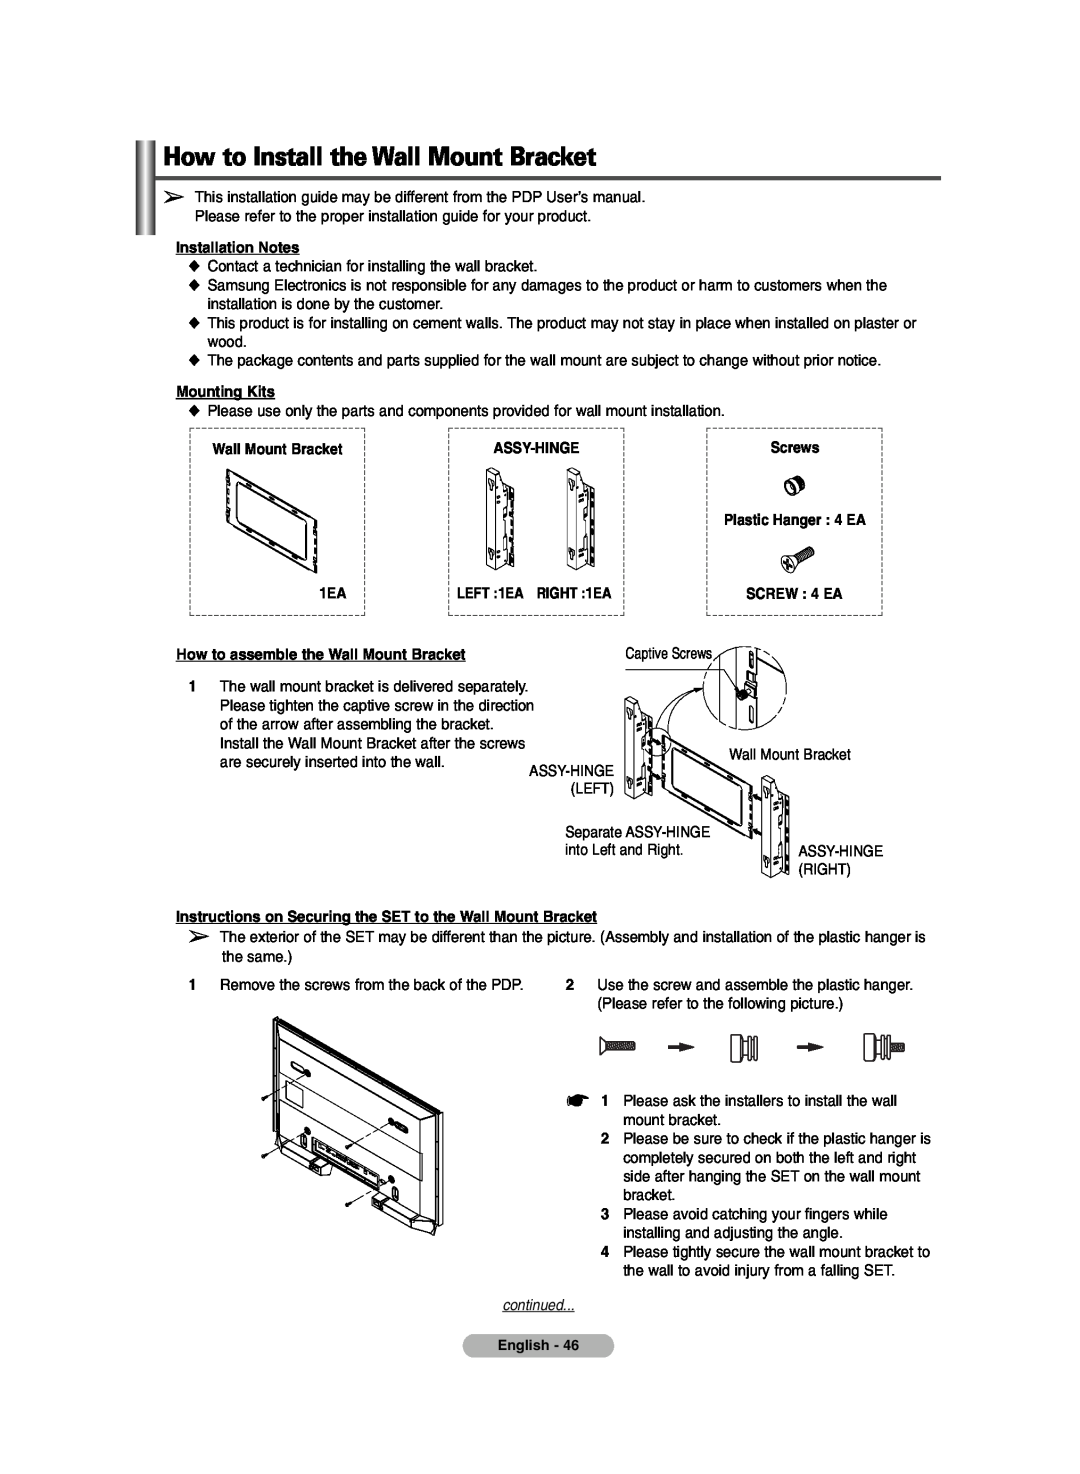 Samsung PDP-TELEVISION manual How to Install the Wall Mount Bracket, continued 